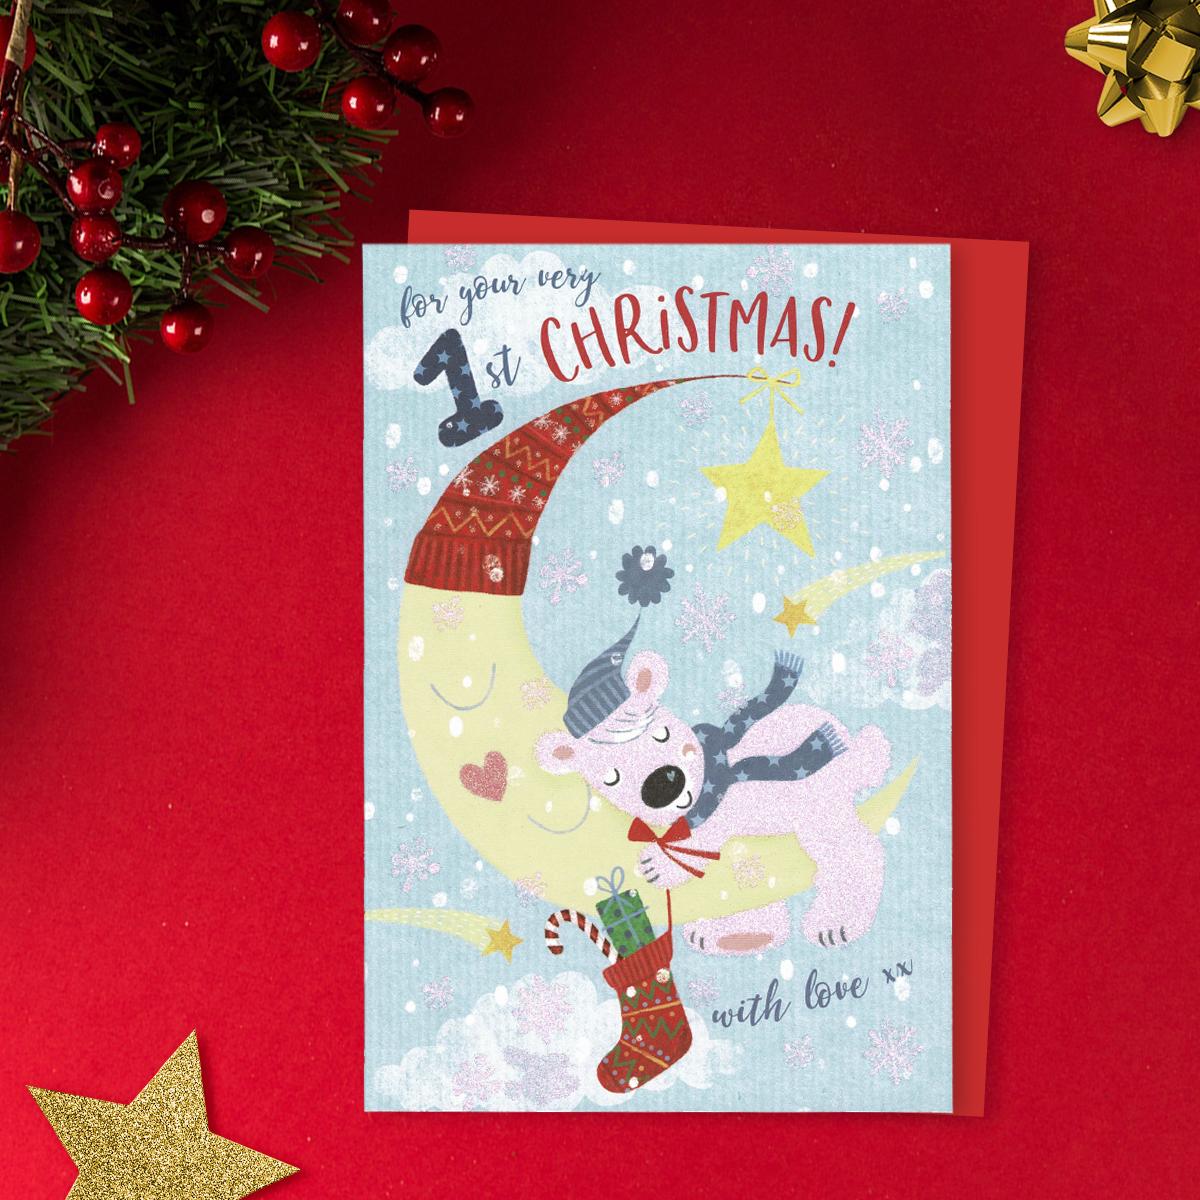 For Your Very 1st Christmas Featuring A Bear asleep On The Moon With Christmas Stocking. Printed Insert With Little Boy Verse. Red Envelope